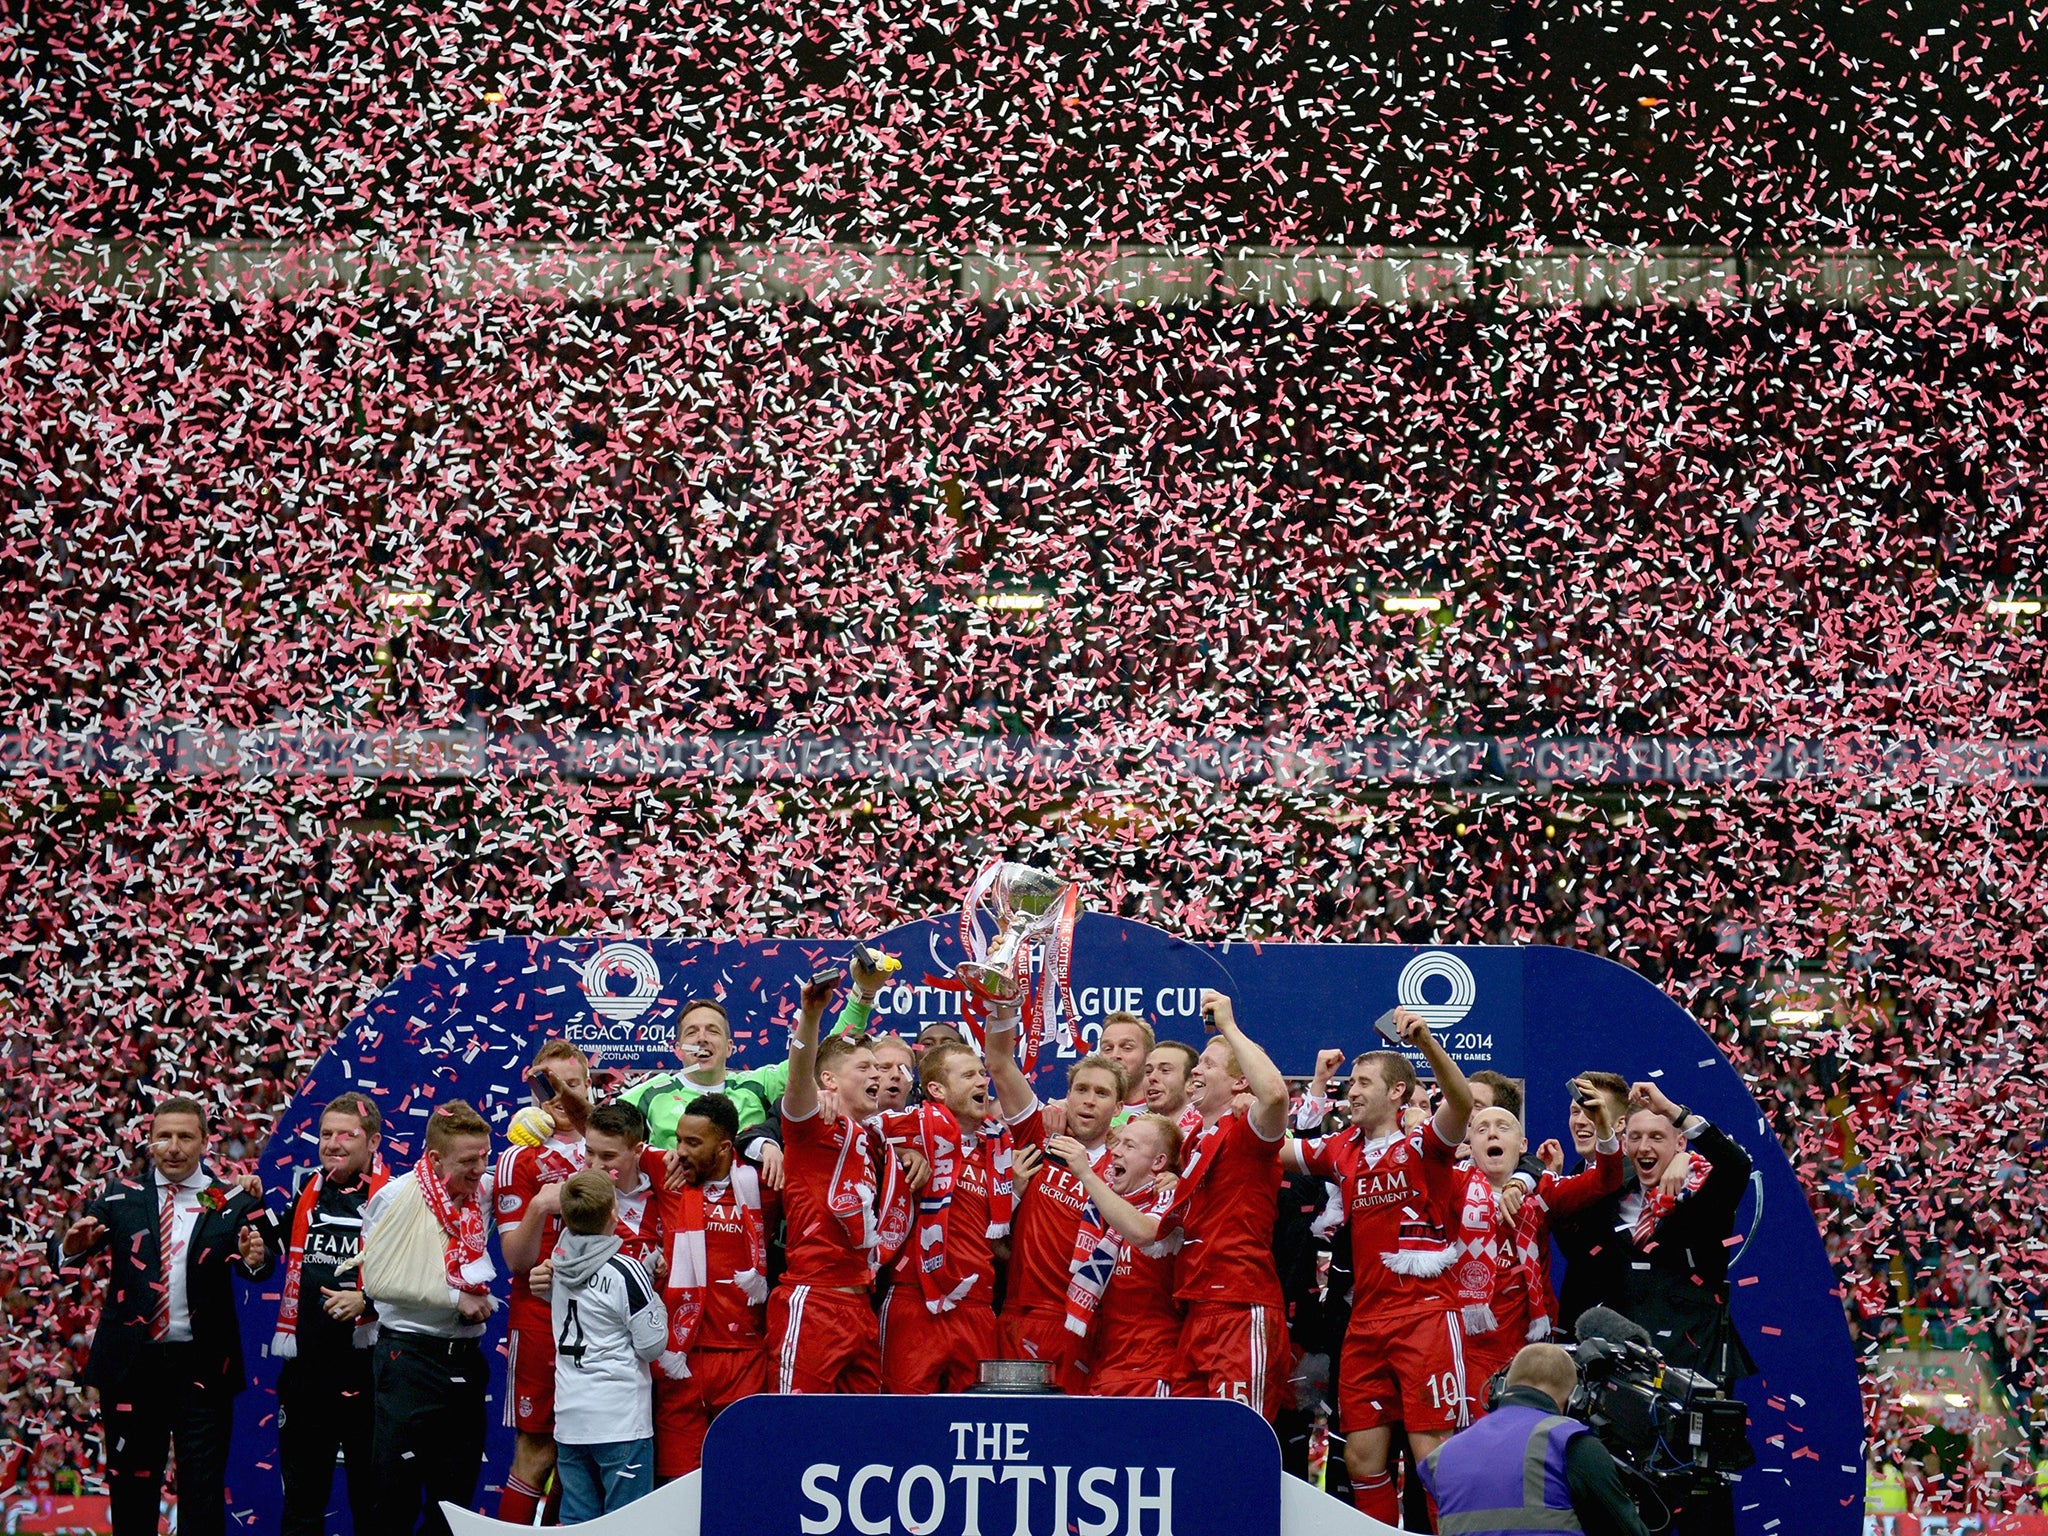 Aberdeen celebrate winning last year’s Scottish League Cup final after beating Inverness